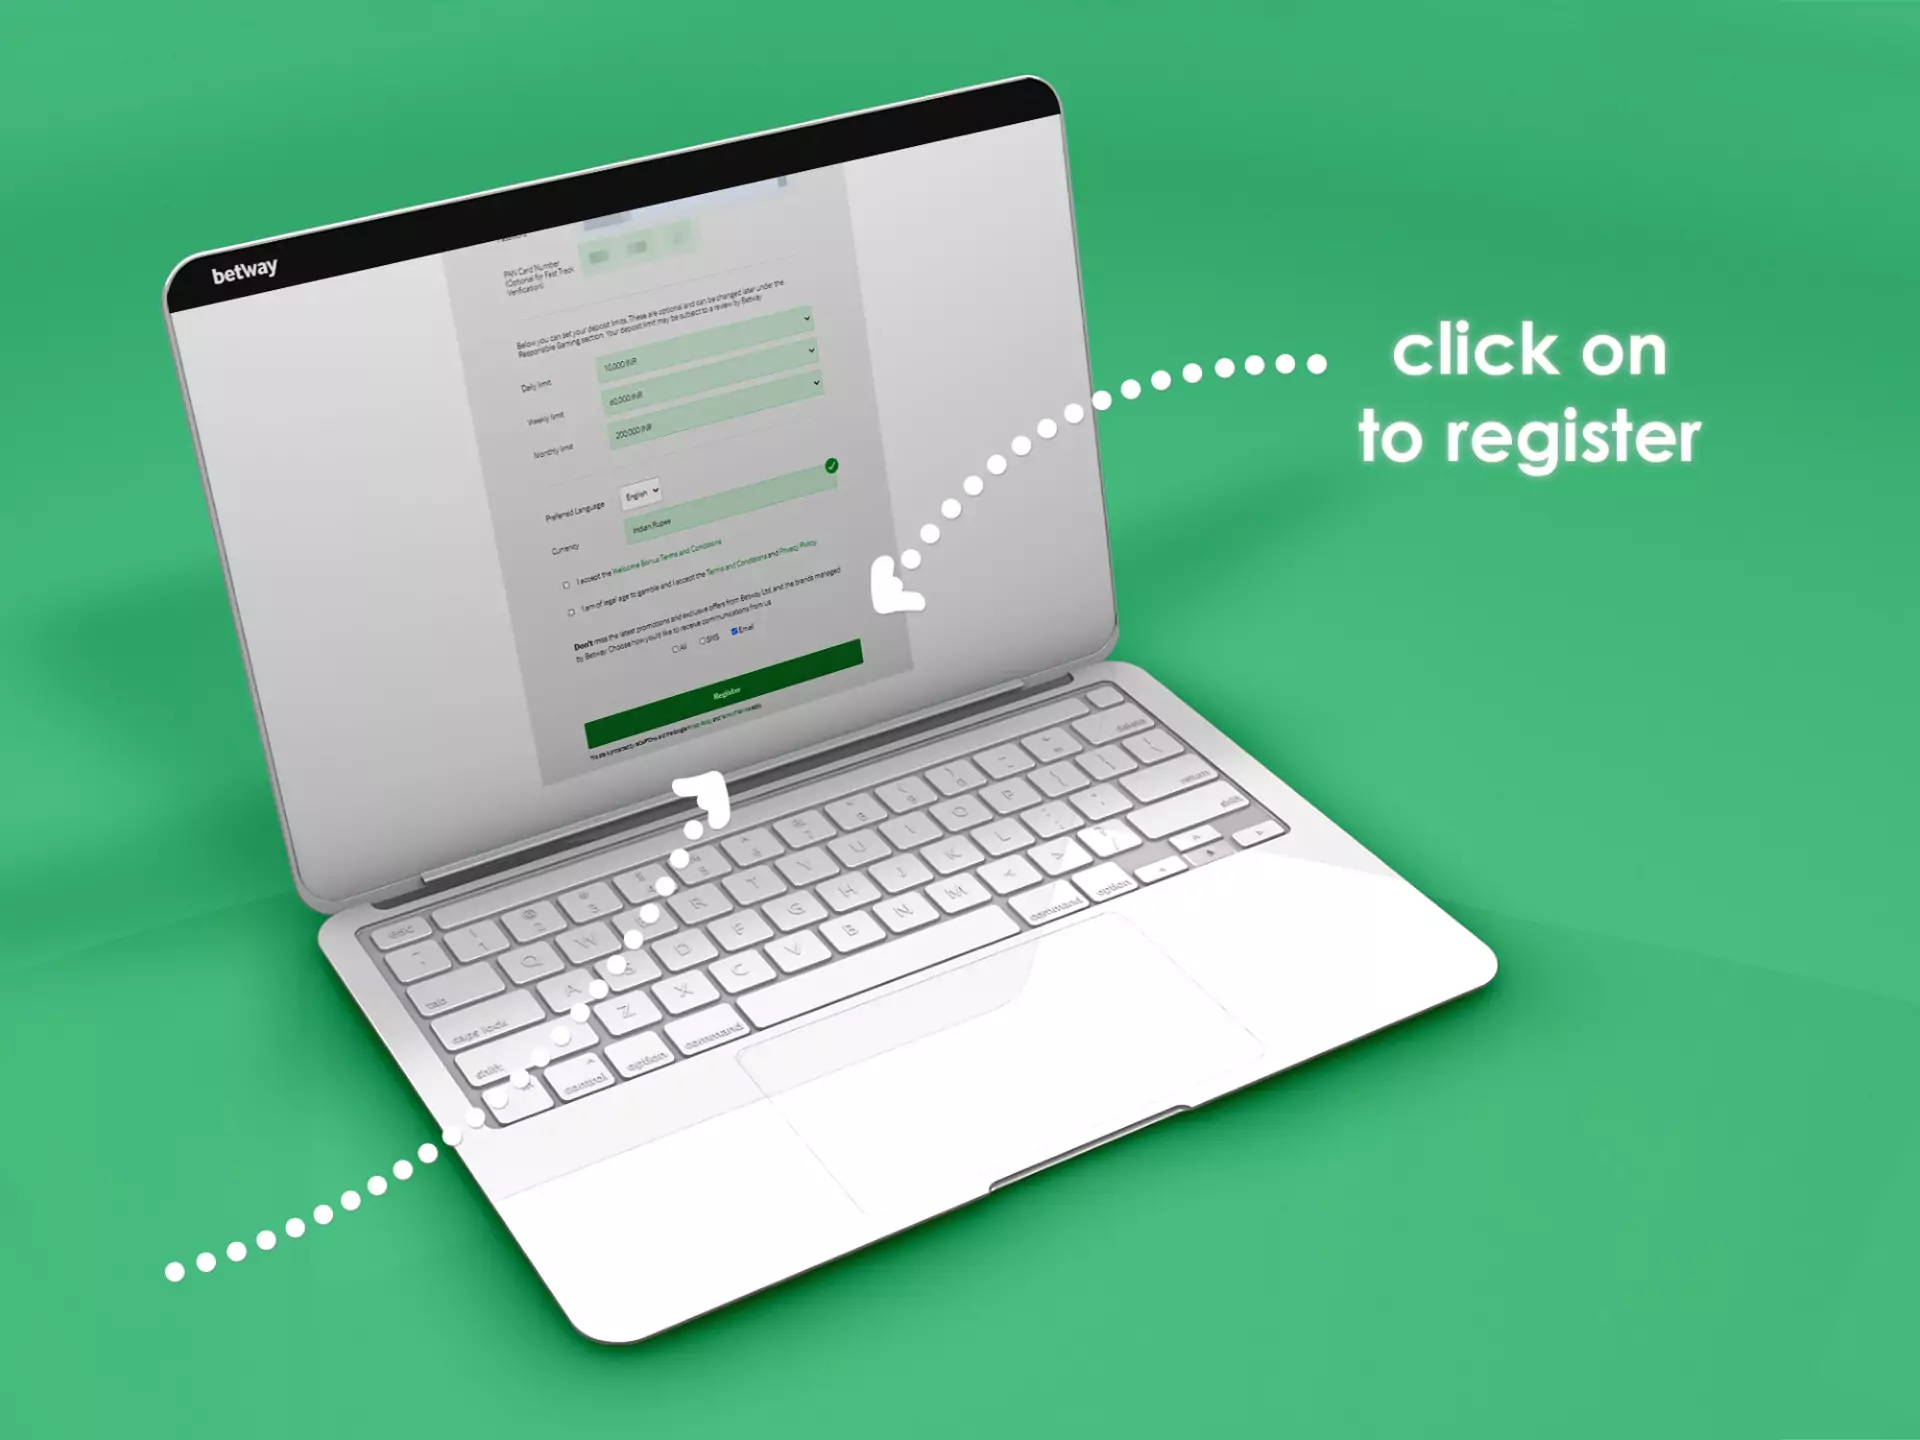 Complete the registration on the Betway website by clicking on the 'Register' button.